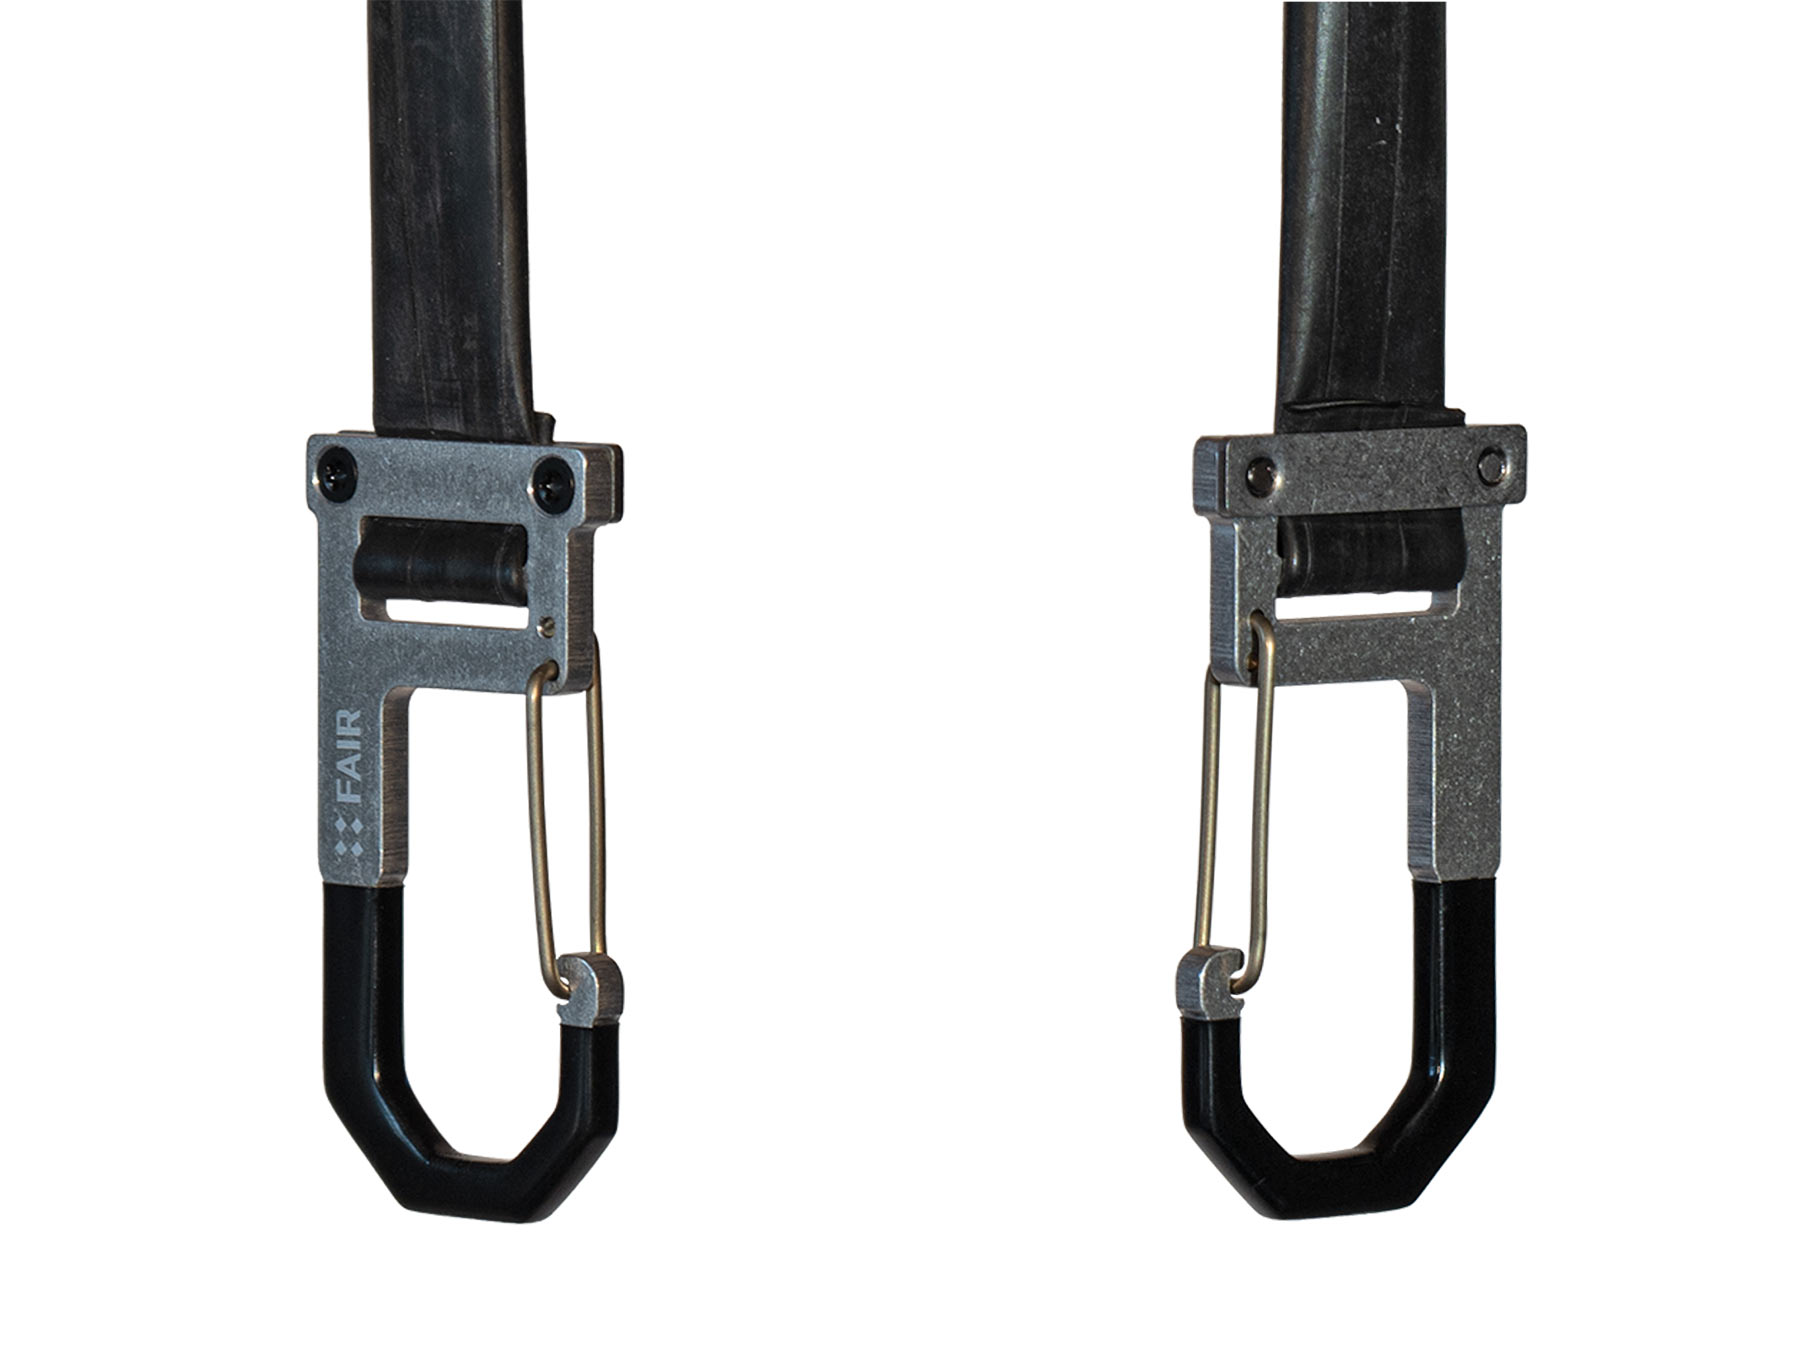 FAIR Daily Hook premium lifetime eco-friendly bungee cord cargo strap, pair of hooks only